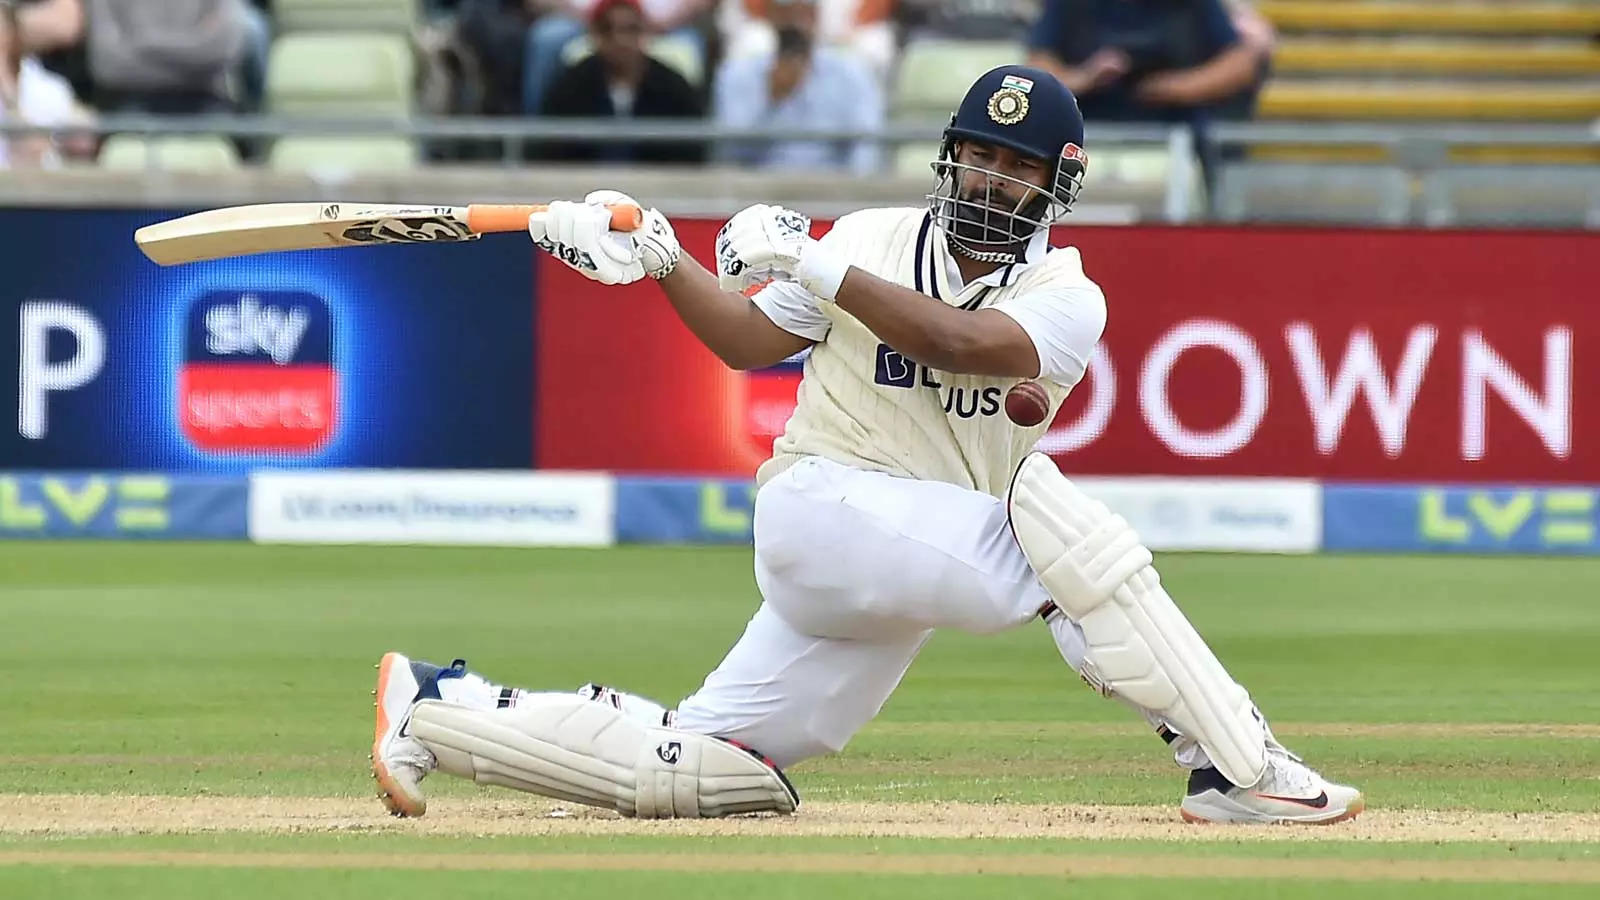 Rishabh Pant has been playing counter-attacking cricket in Tests well before 'Bazball' was introduced